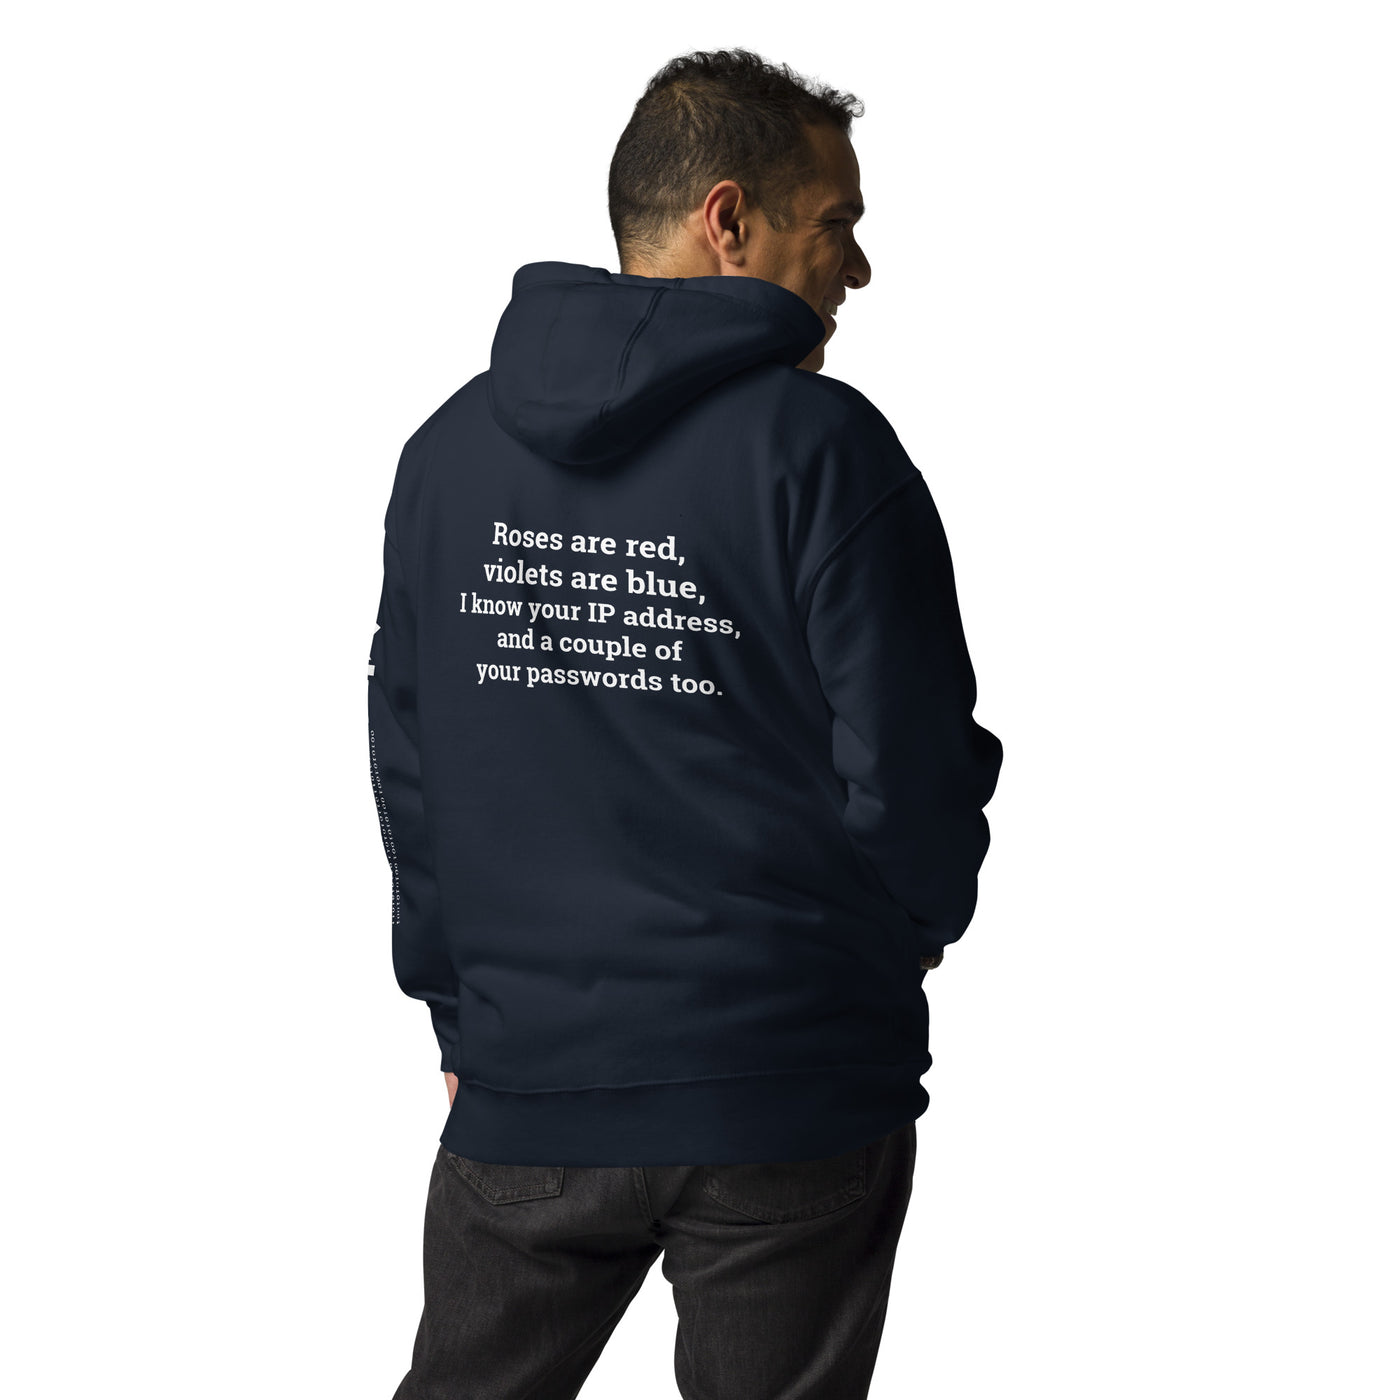 Roses are red; I know your IP and Passwords - Unisex Hoodie ( Back Print )